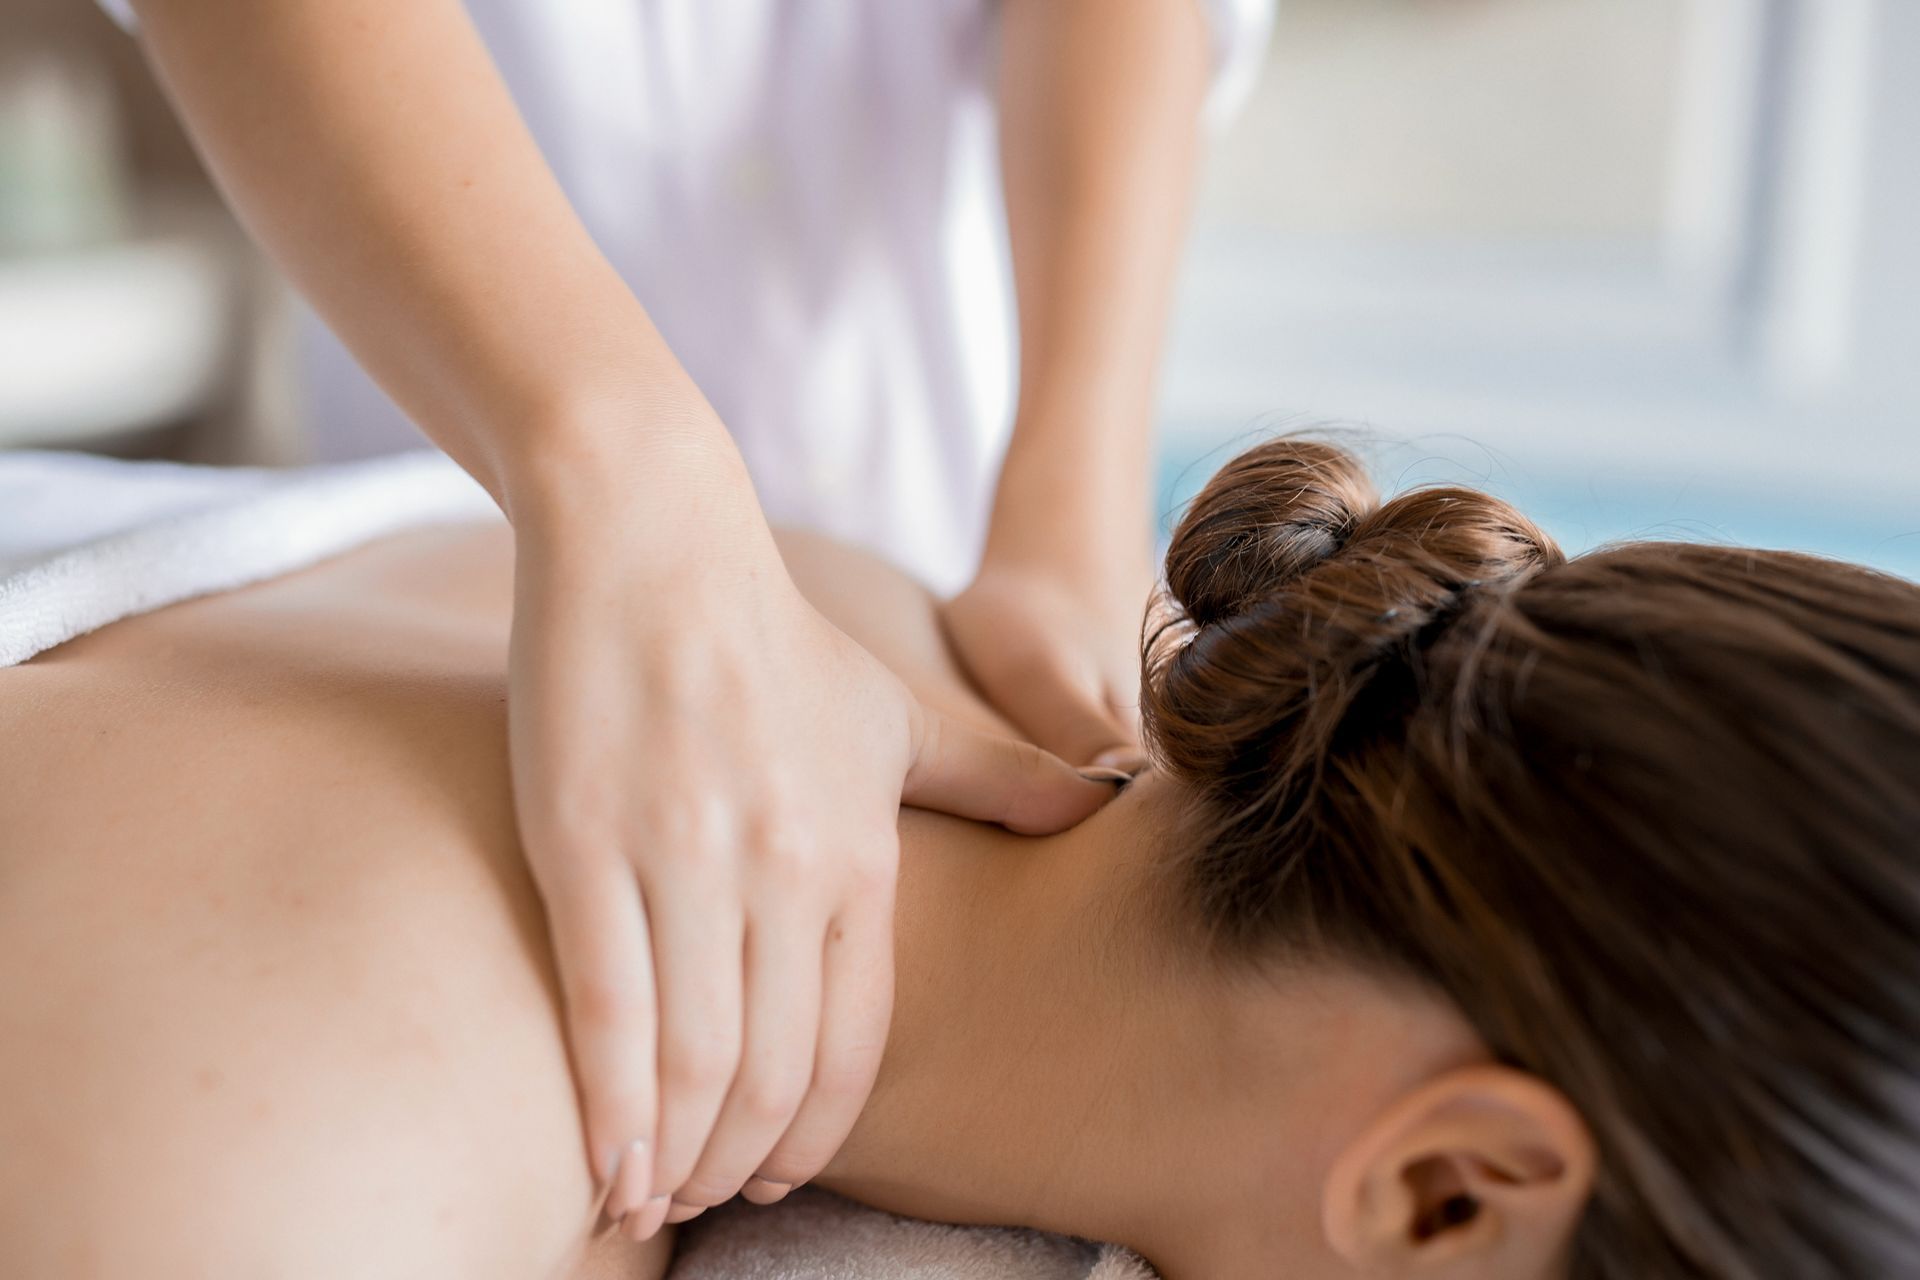 a woman is getting a massage on her back